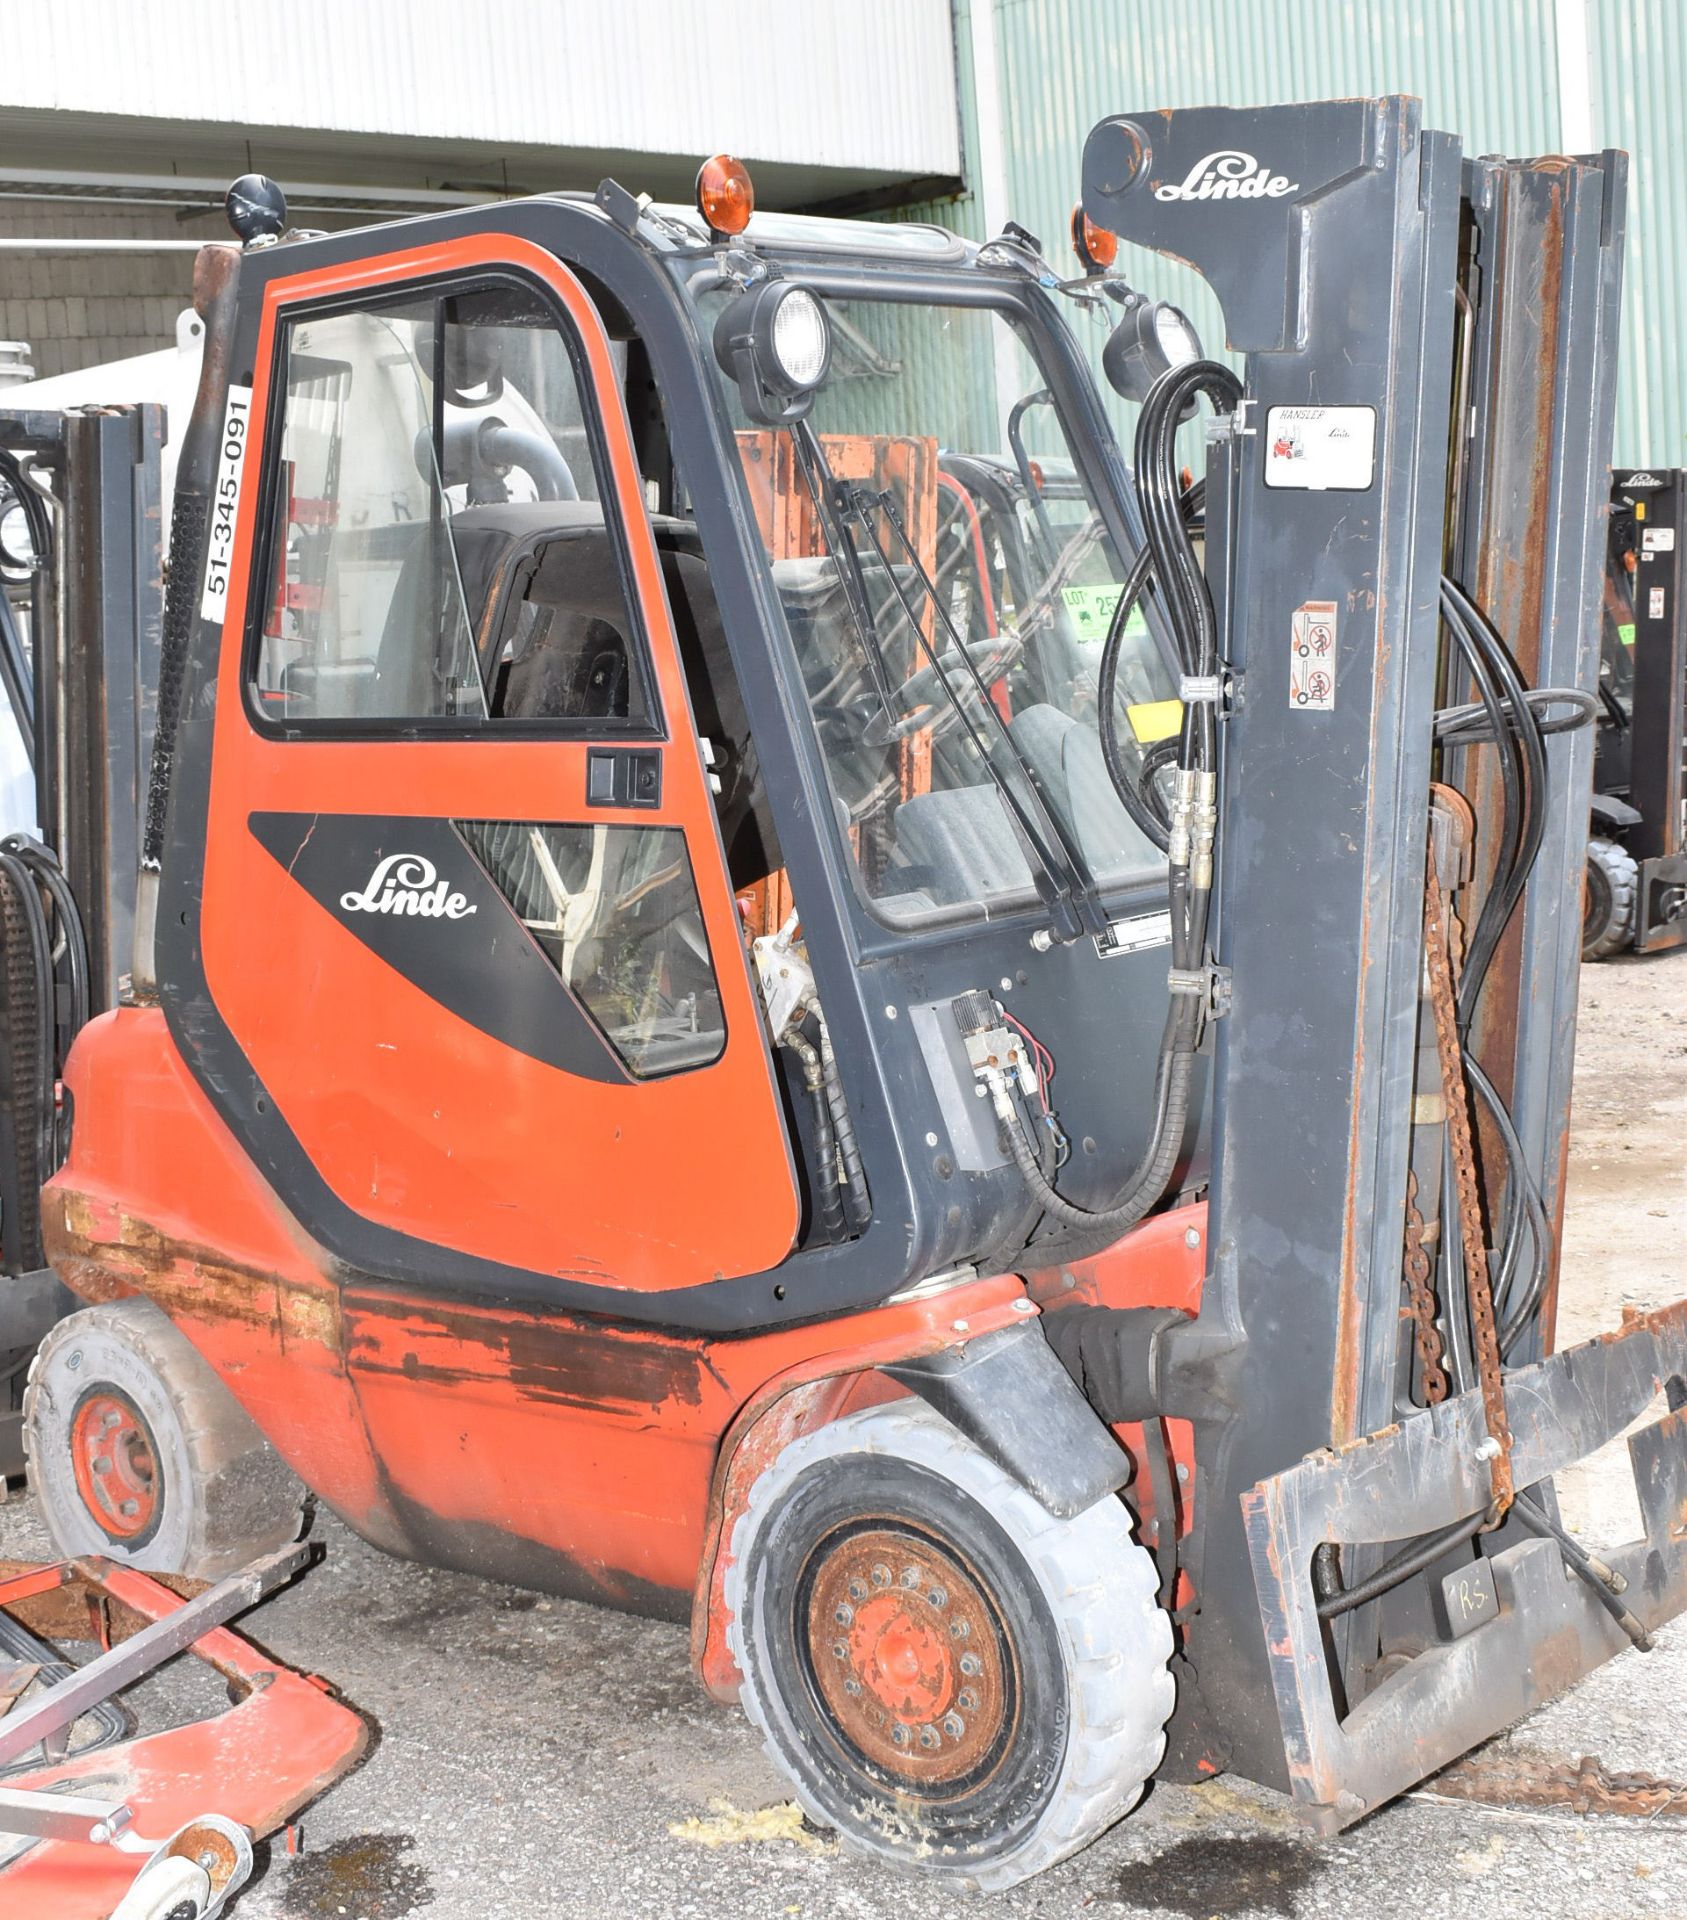 LINDE H25T 3,475 LB. CAPACITY LPG FORKLIFT WITH 183" MAX. LIFT HEIGHT, 2-STAGE MAST, MULTI-SURFACE - Image 2 of 8